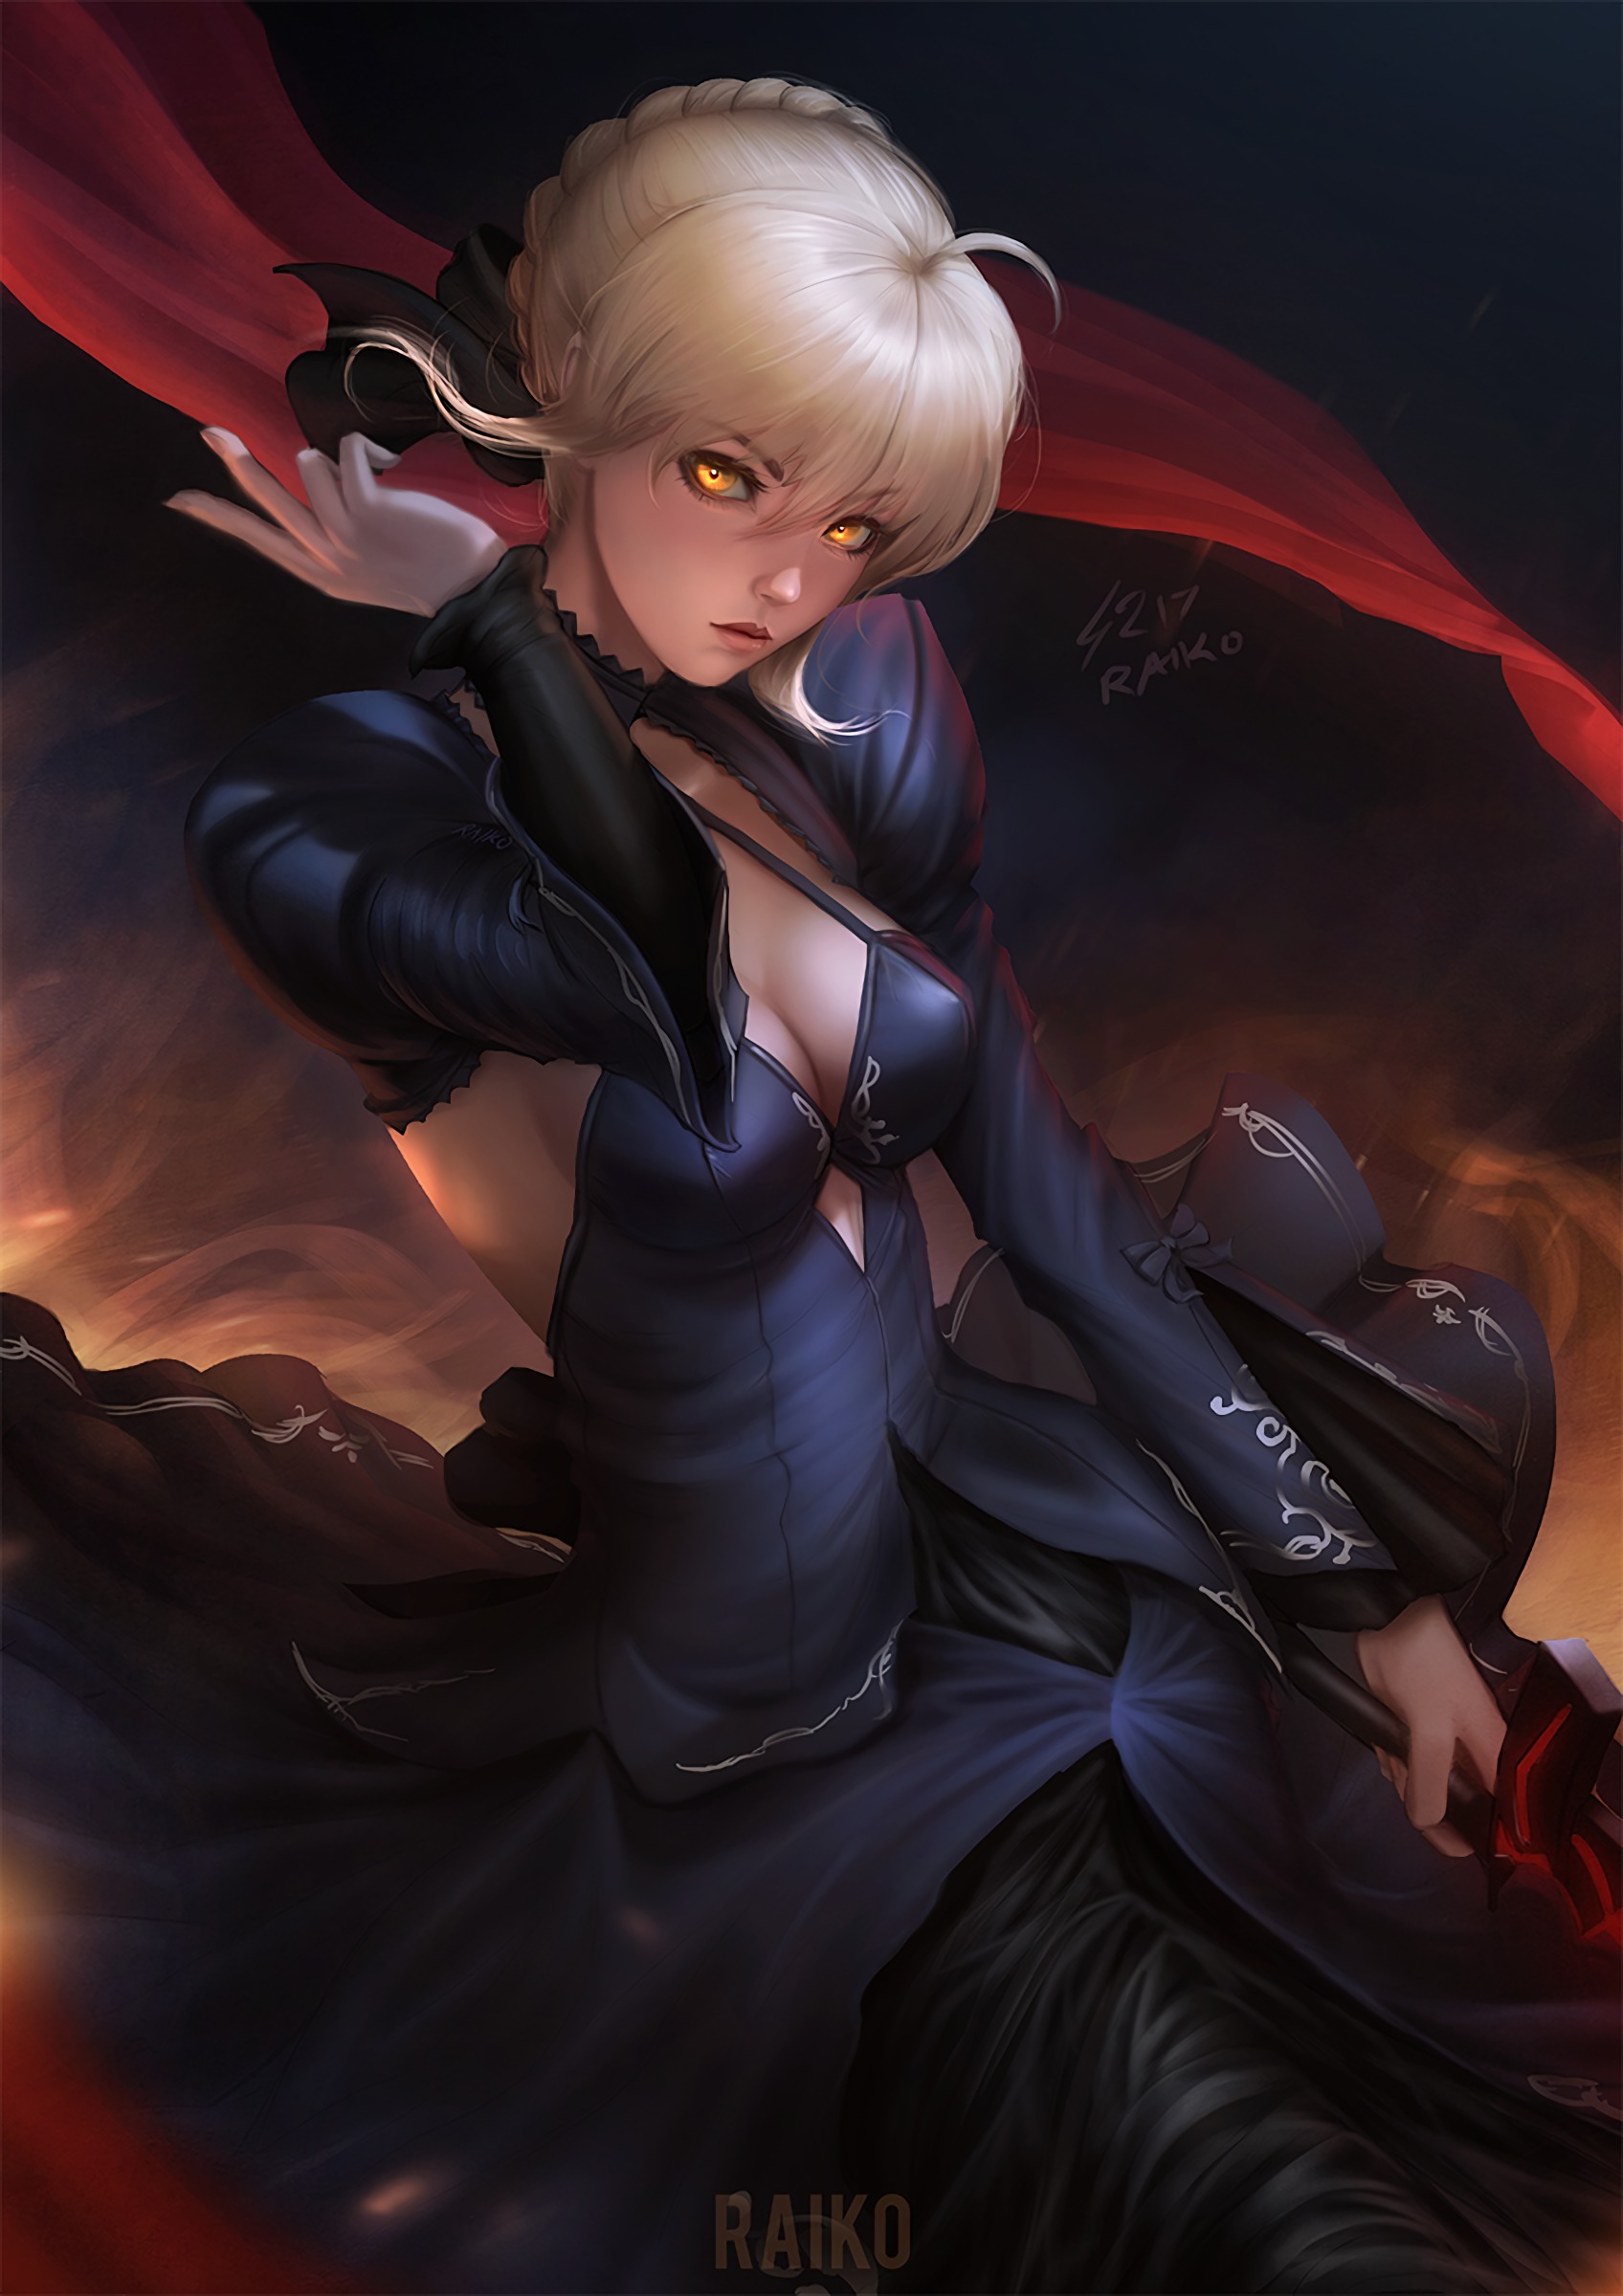 Anime 1696x2400 Fate series Fate/Grand Order fate/stay night: heaven's feel anime girls 2D fan art digital art portrait display black dress cleavage fantasy weapon yellow eyes Saber Alter looking at viewer Sean Tay blonde Artoria Pendragon